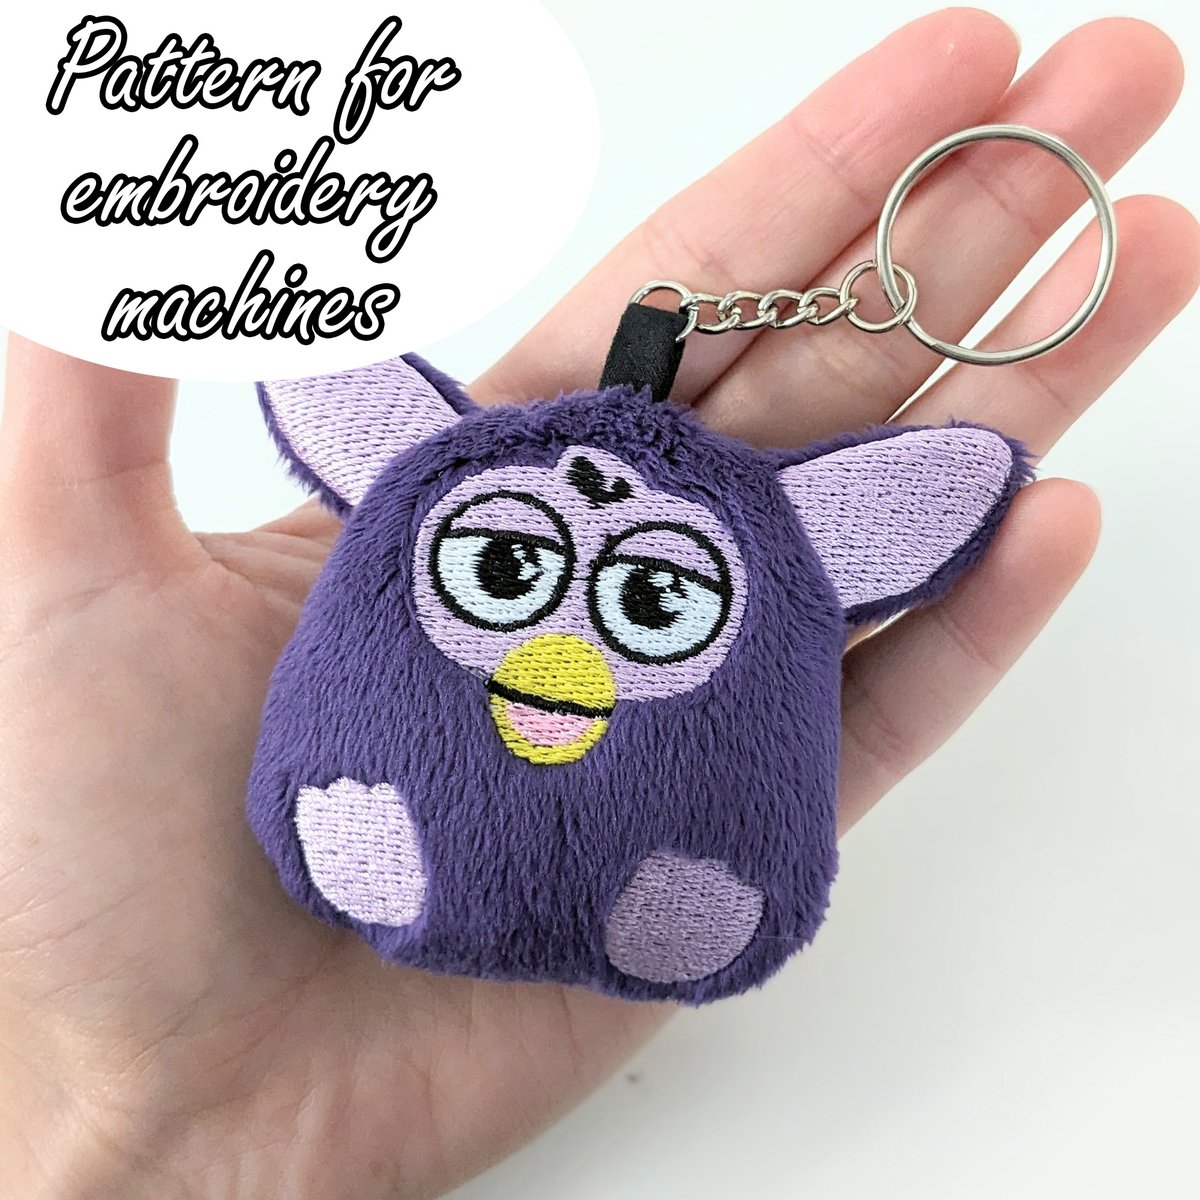 The newest pattern in the shops is the Furby keychain! Super easy to make in any color of your choice. You know where to find the links!